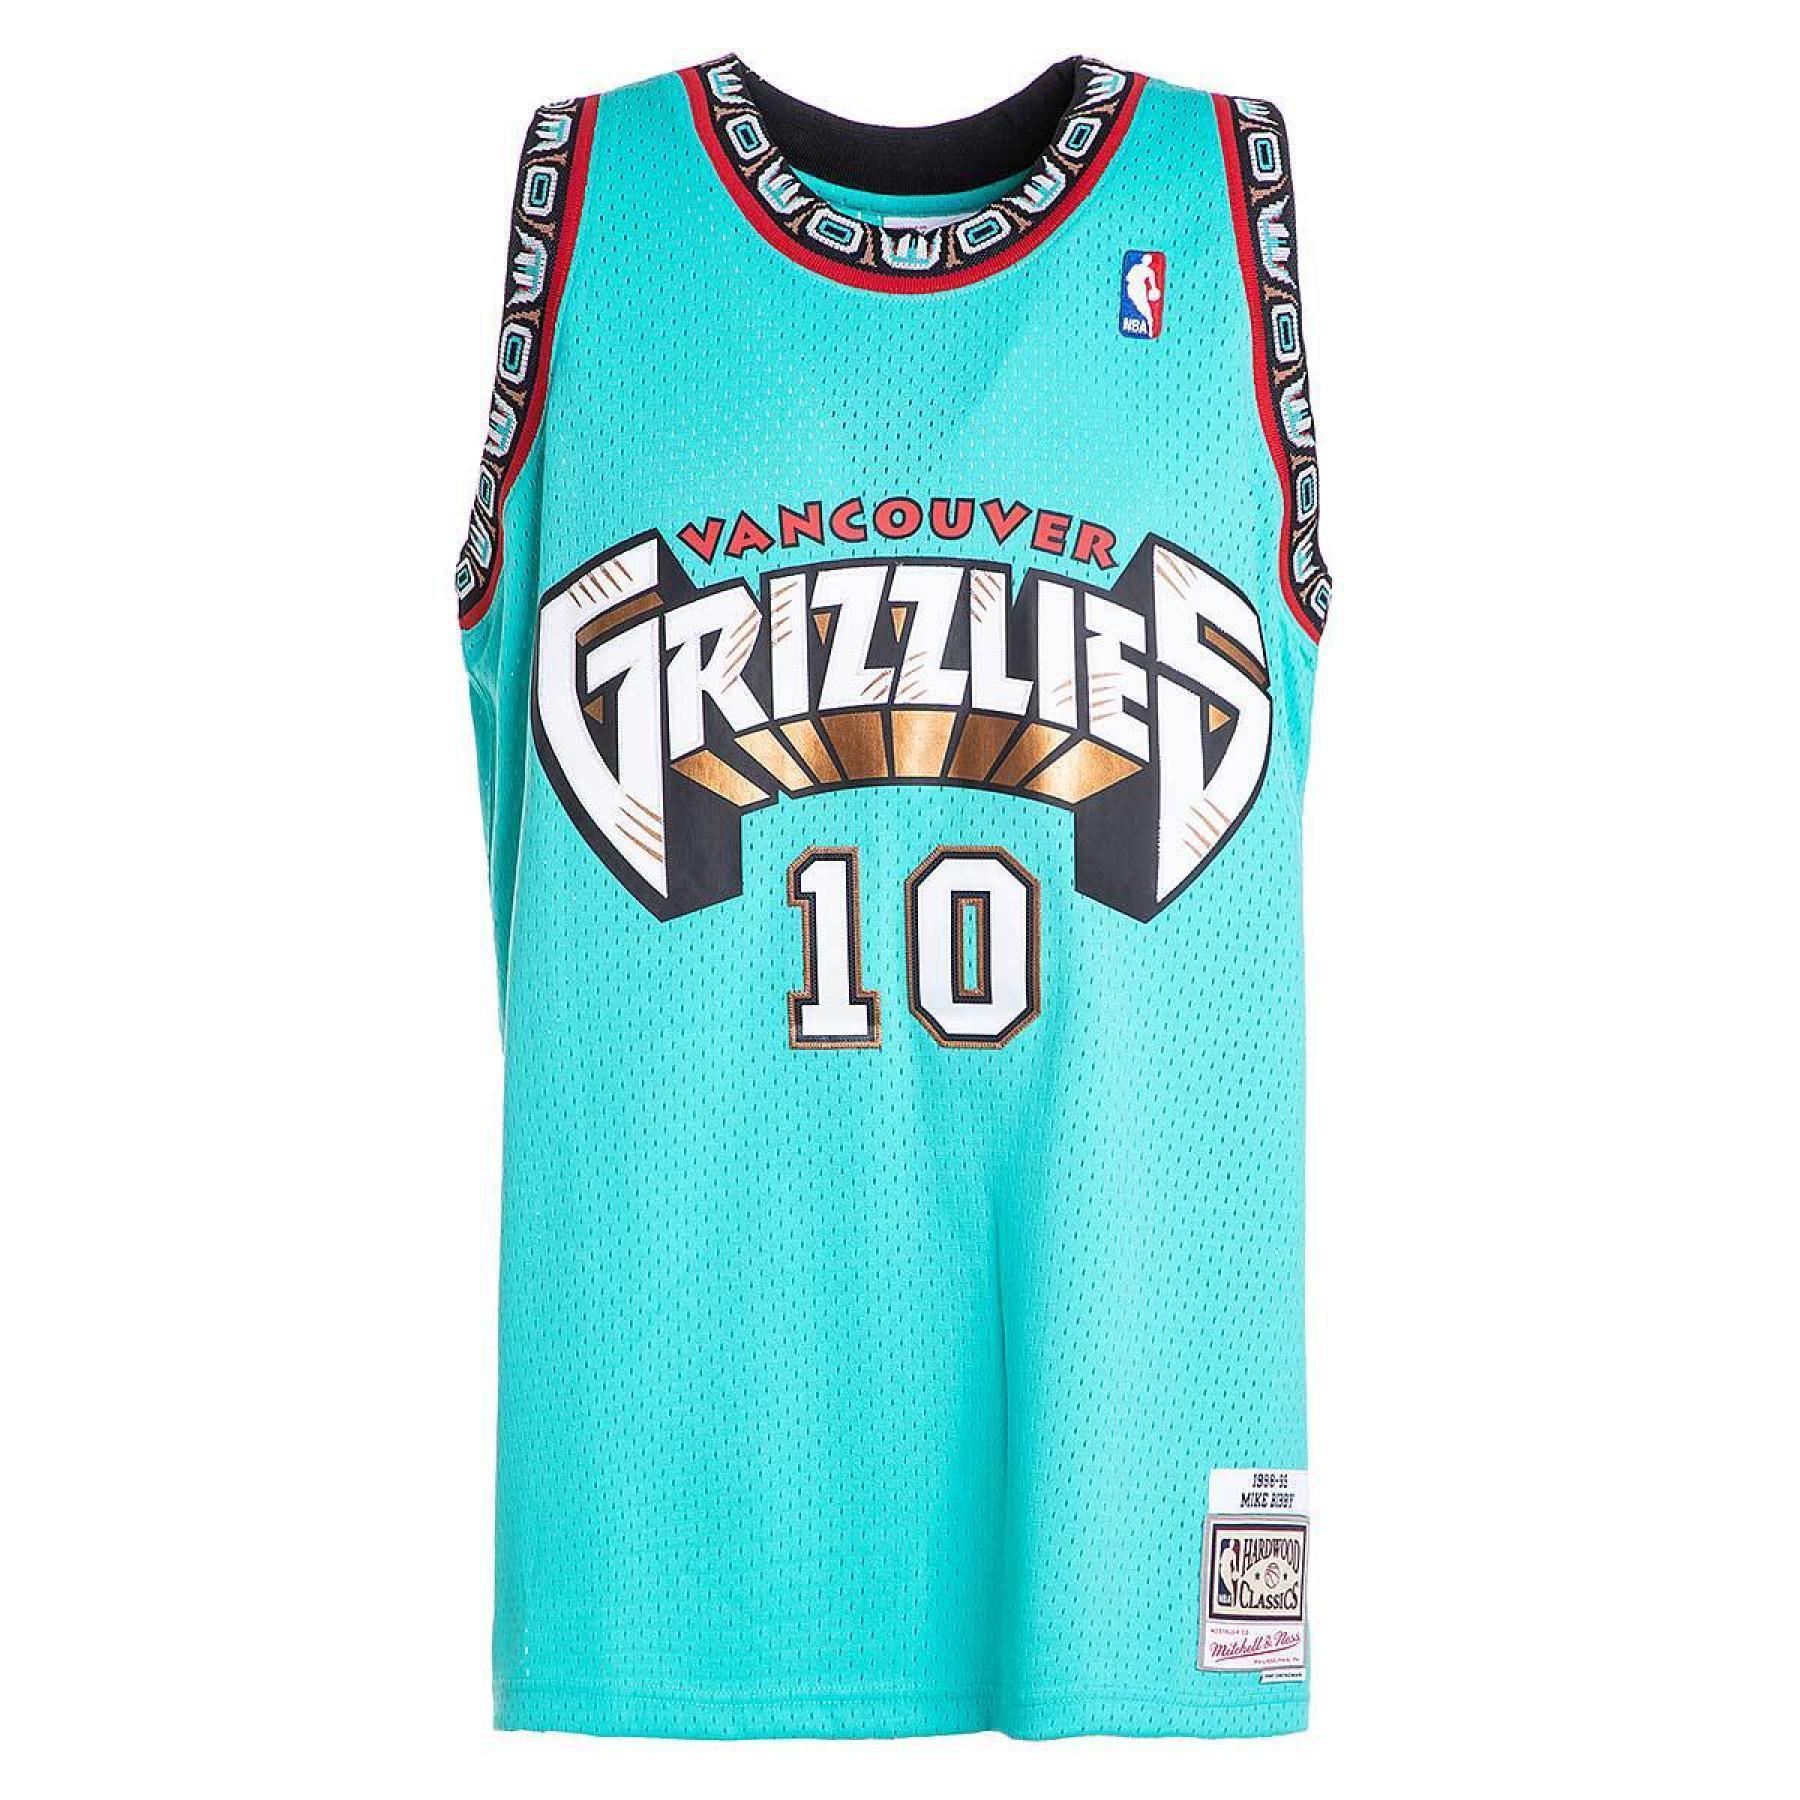 Jersey Mitchell & Ness Nba Vancouver Grizzlies